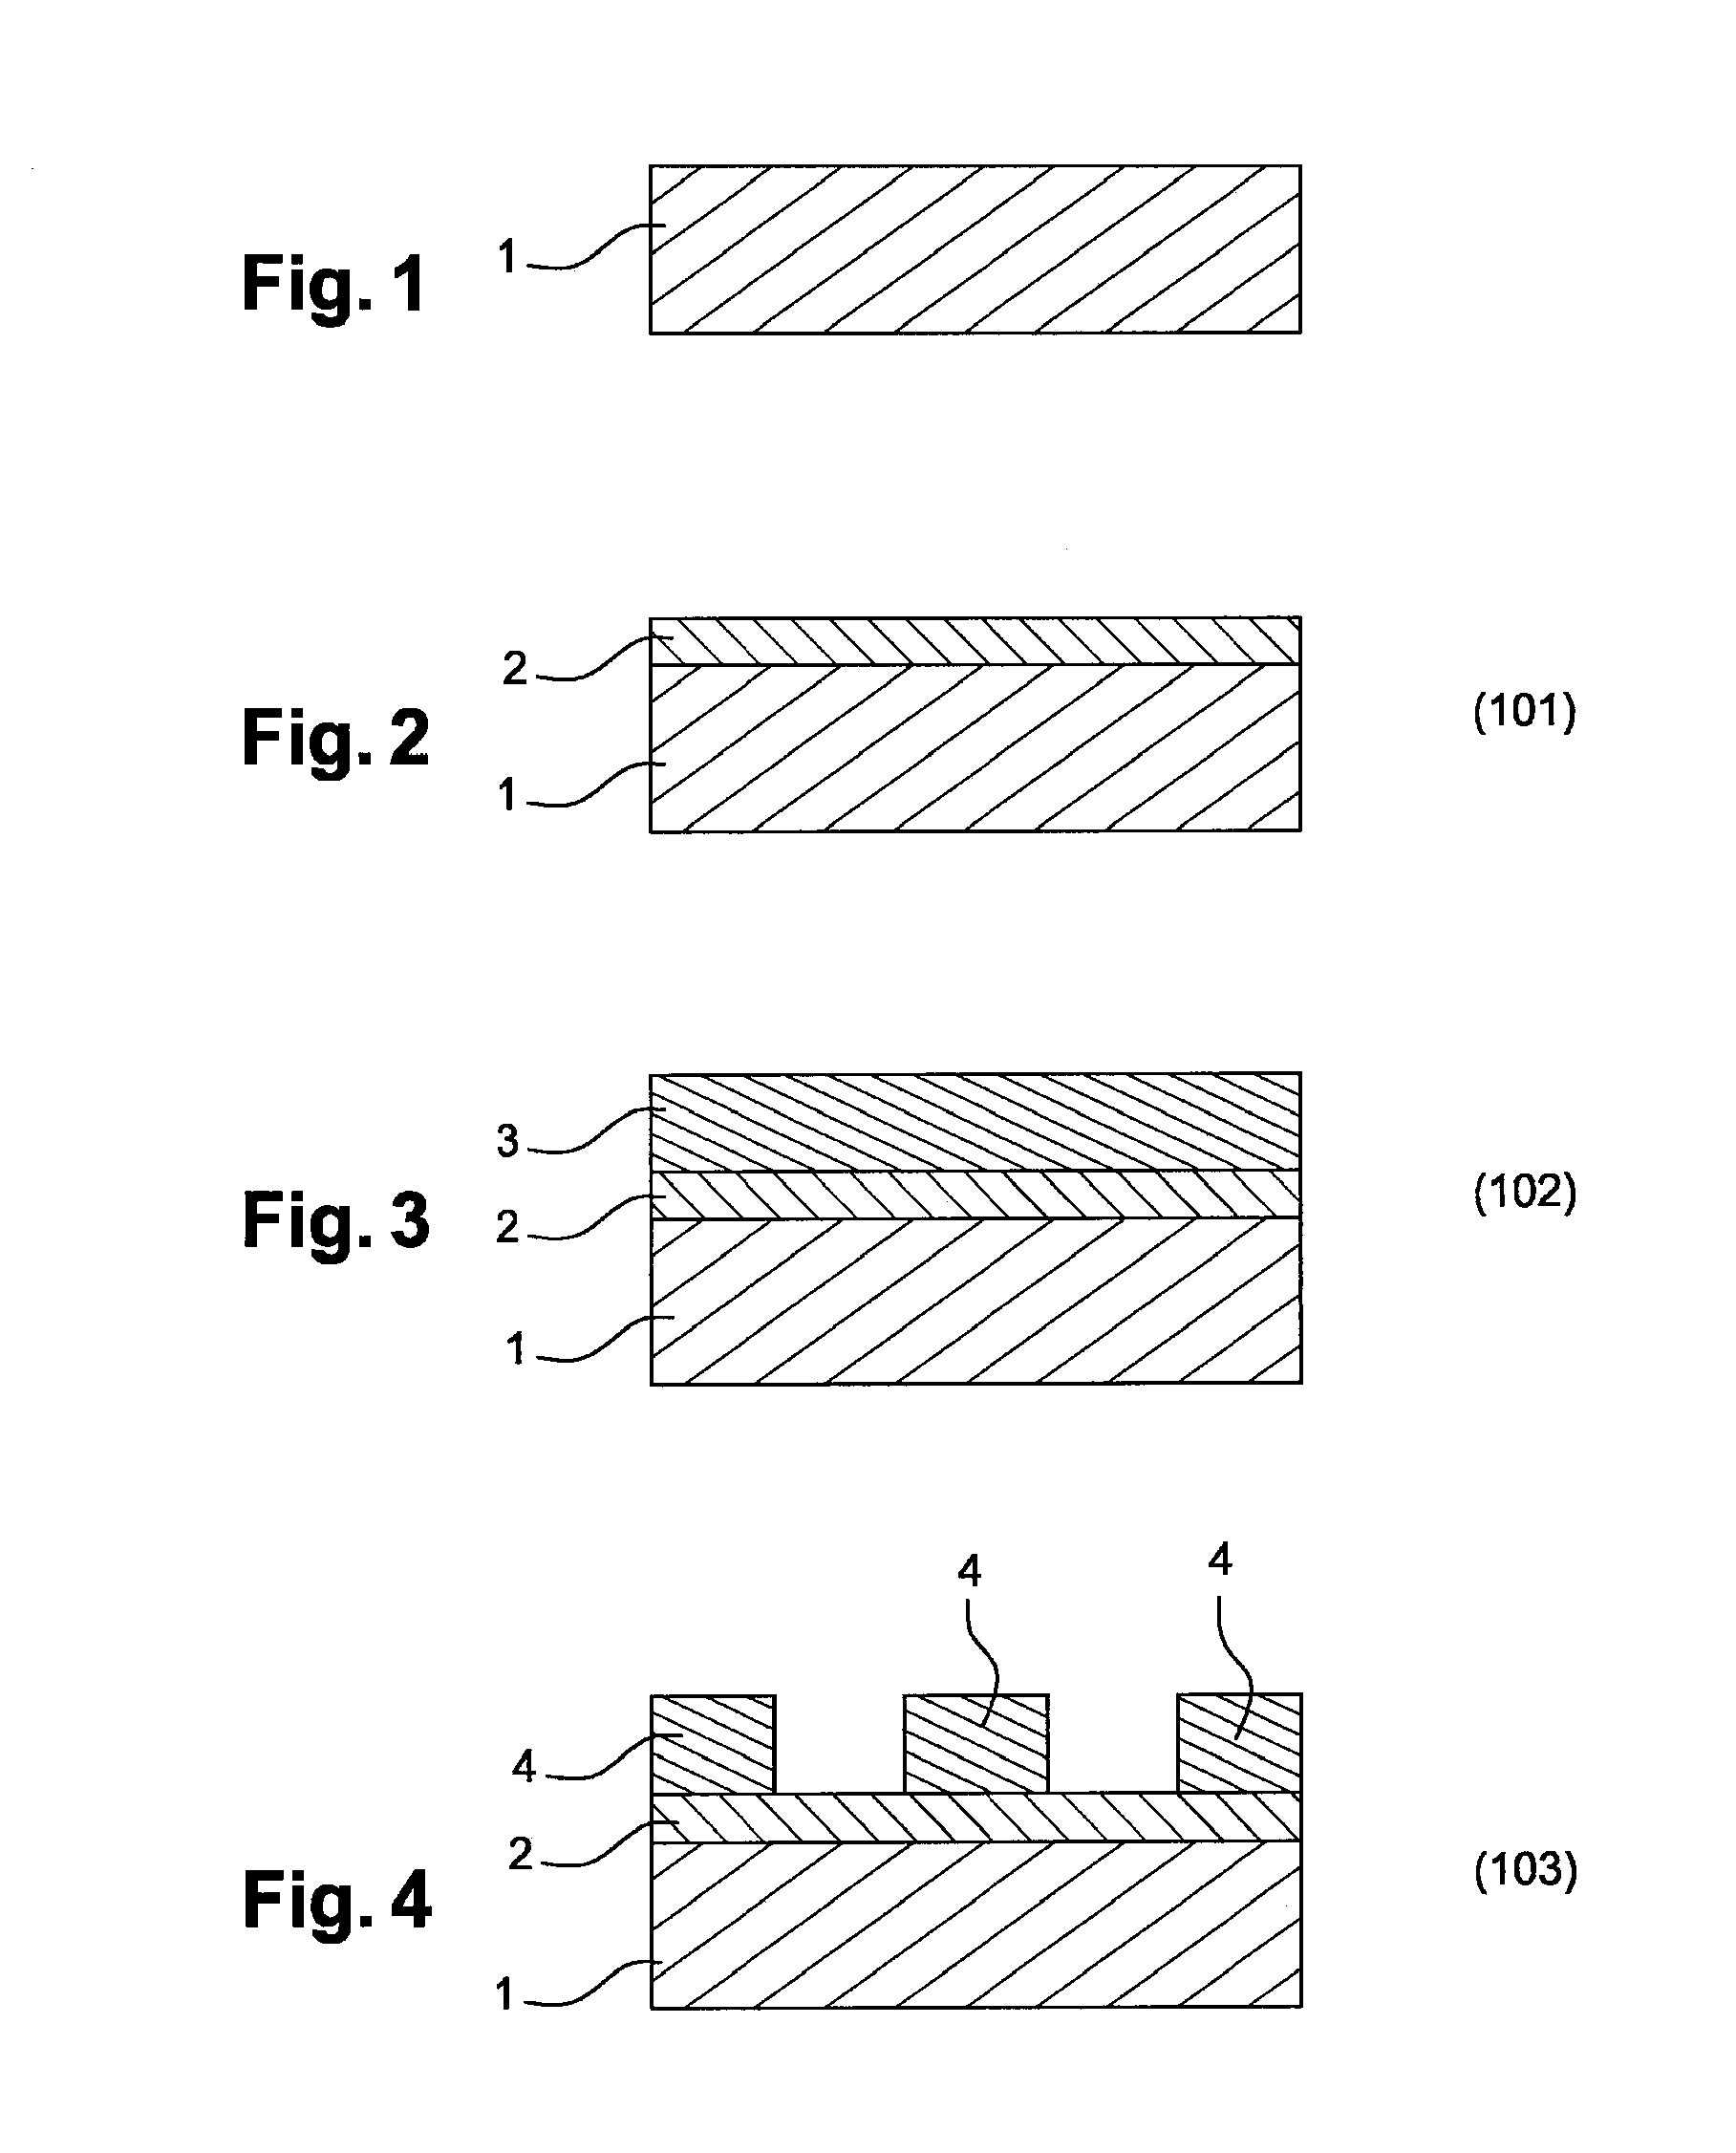 Method for making patterns on the surface of a substrate using block copolymers